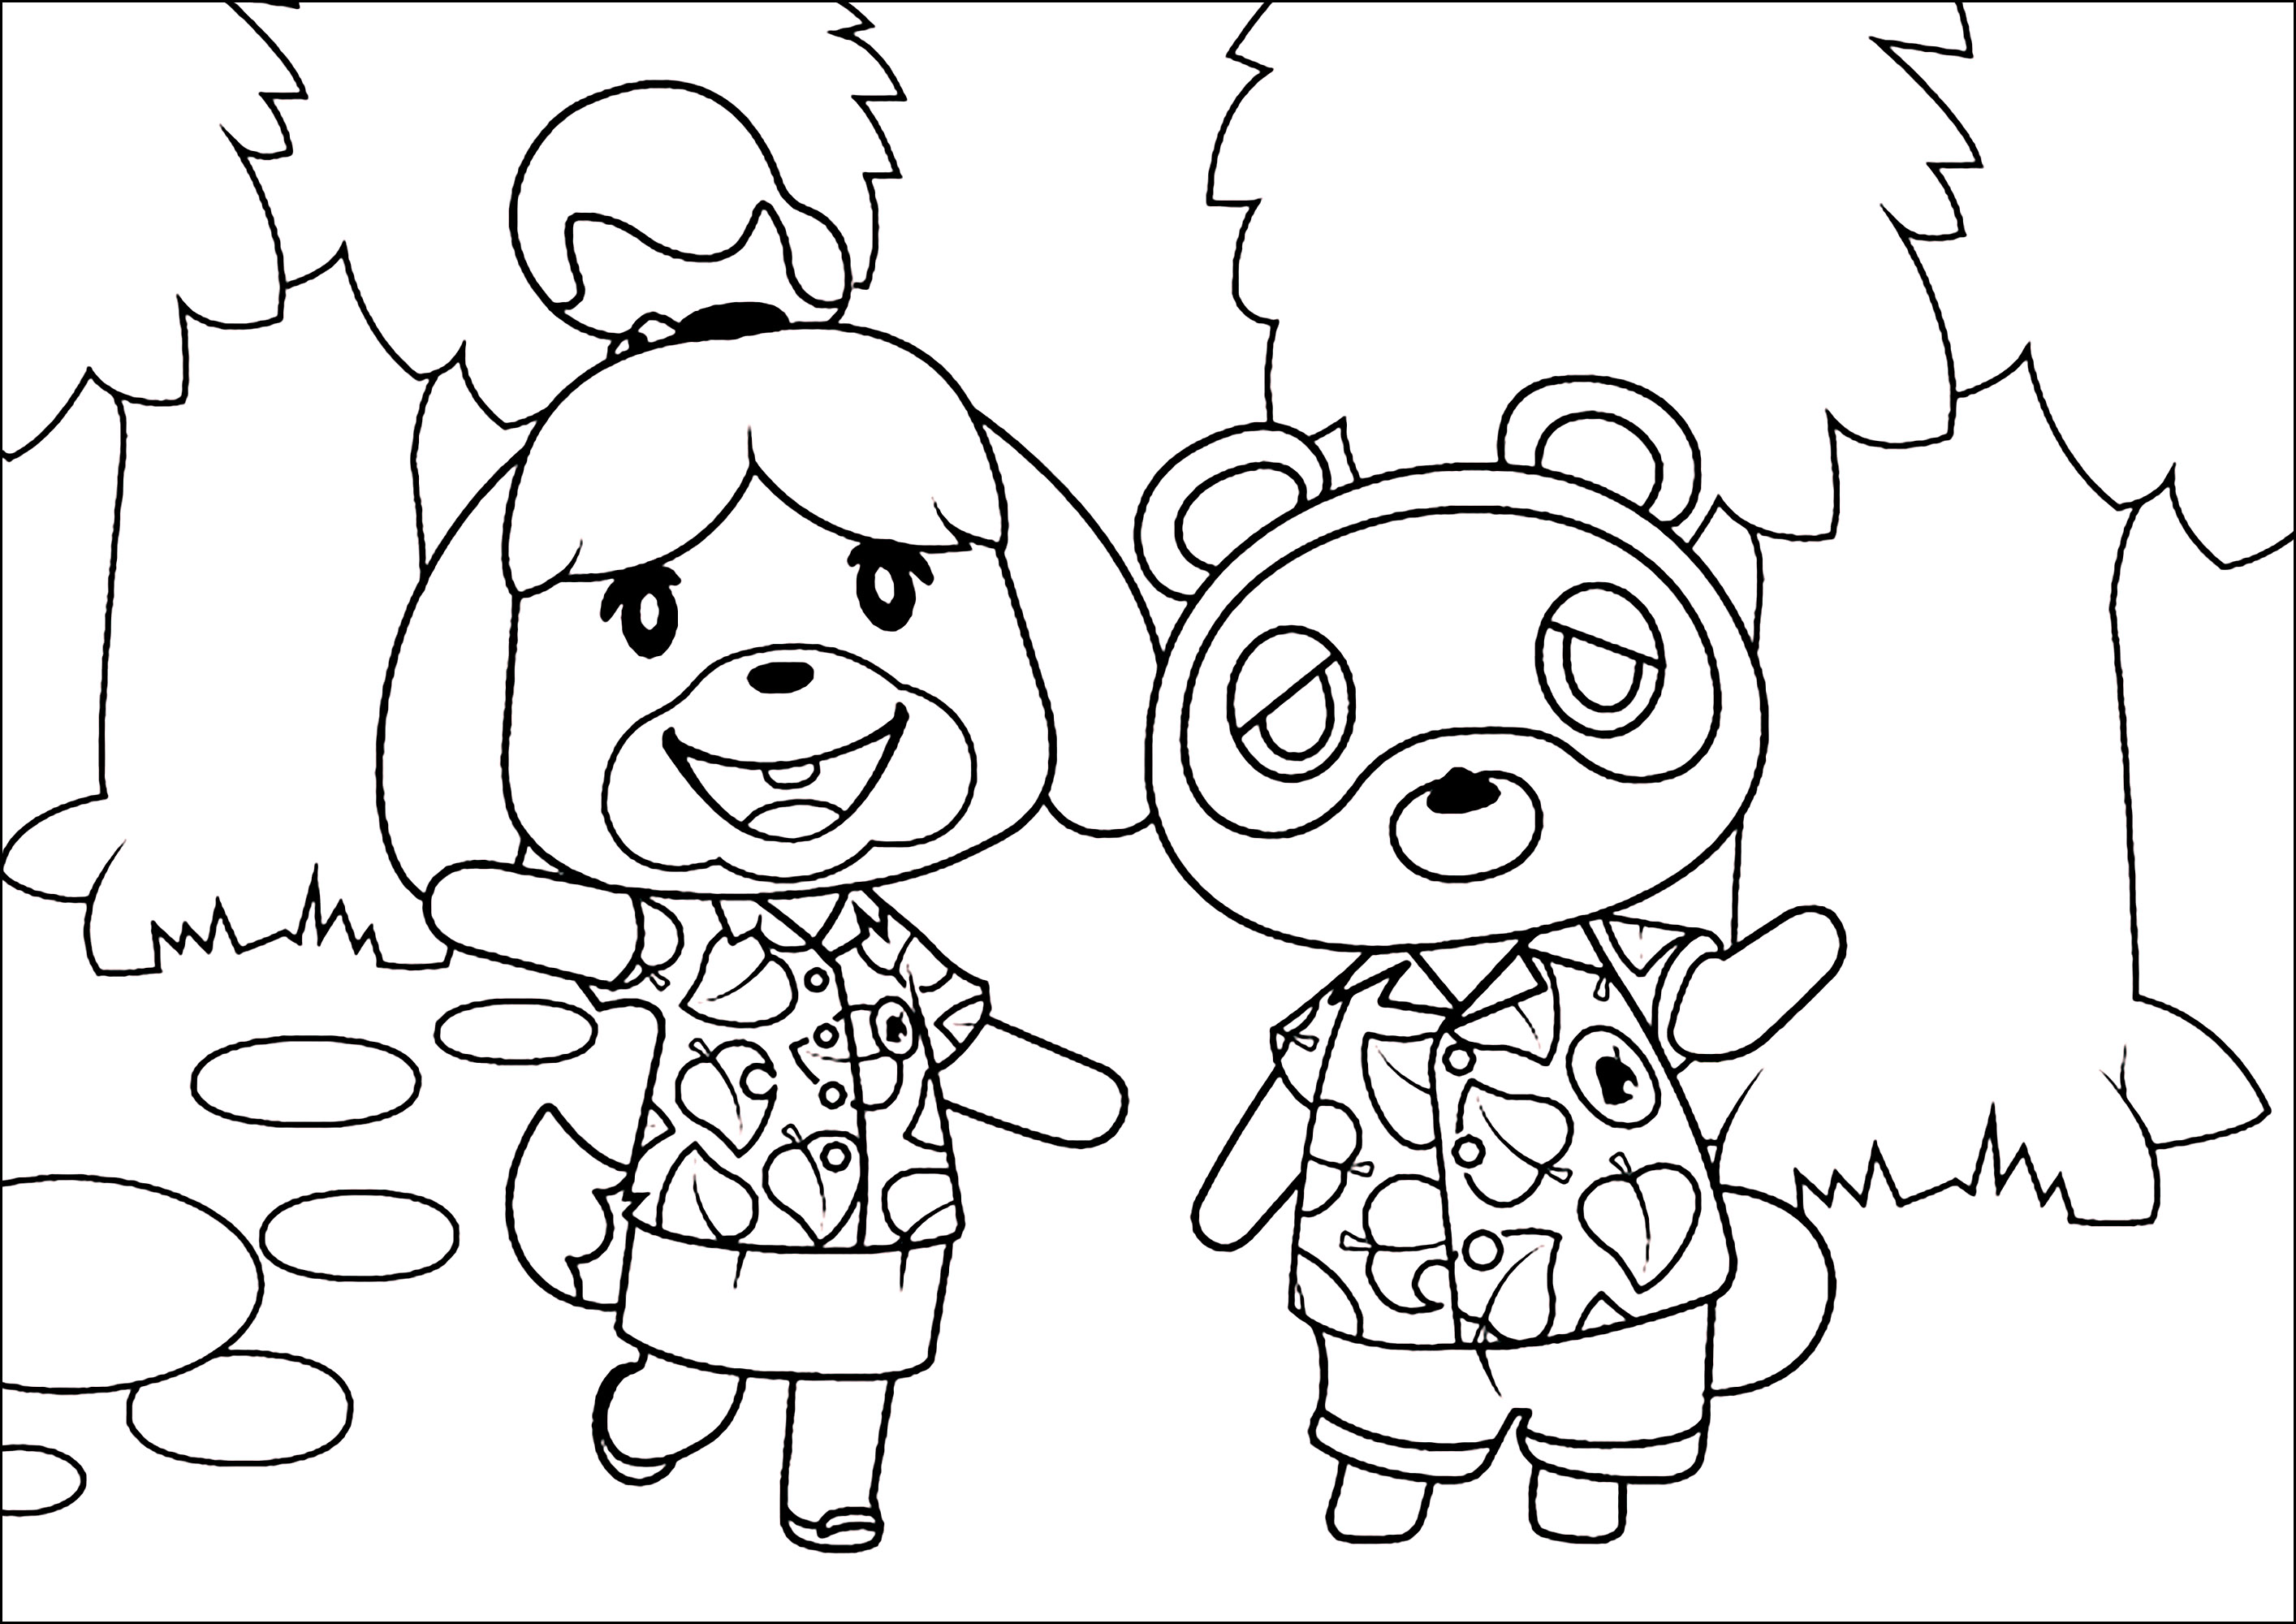 Two Animal Crossing characters: a dog and a raccoon